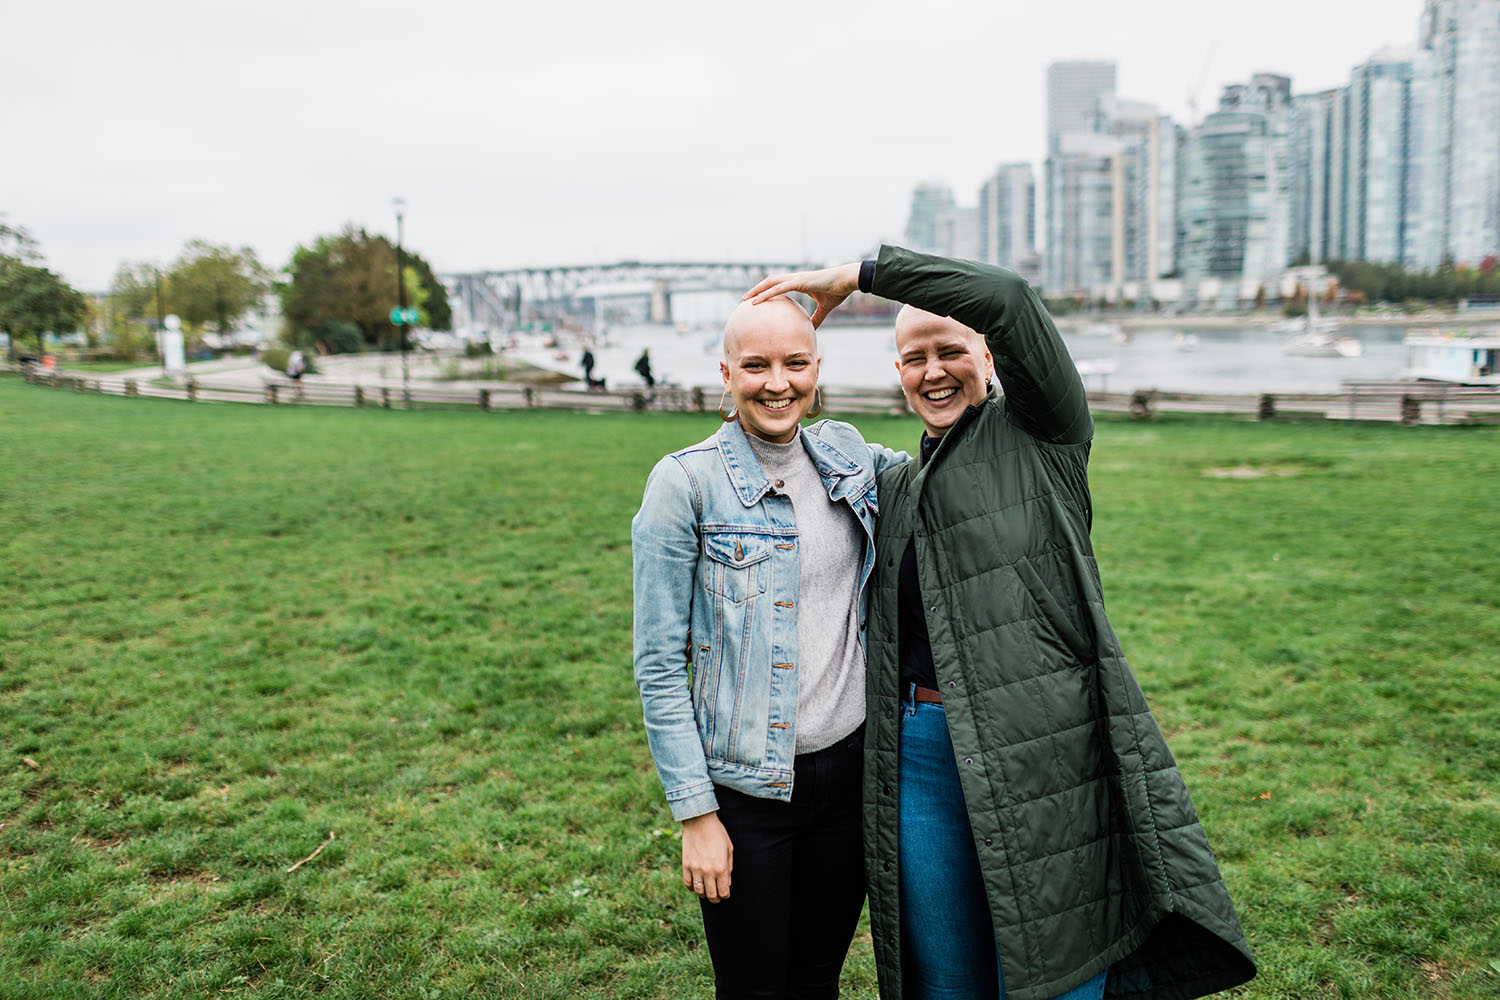 Lillian Rogers and Melissa Riding formed an inseparable friendship after each was diagnosed with breast cancer just two months apart